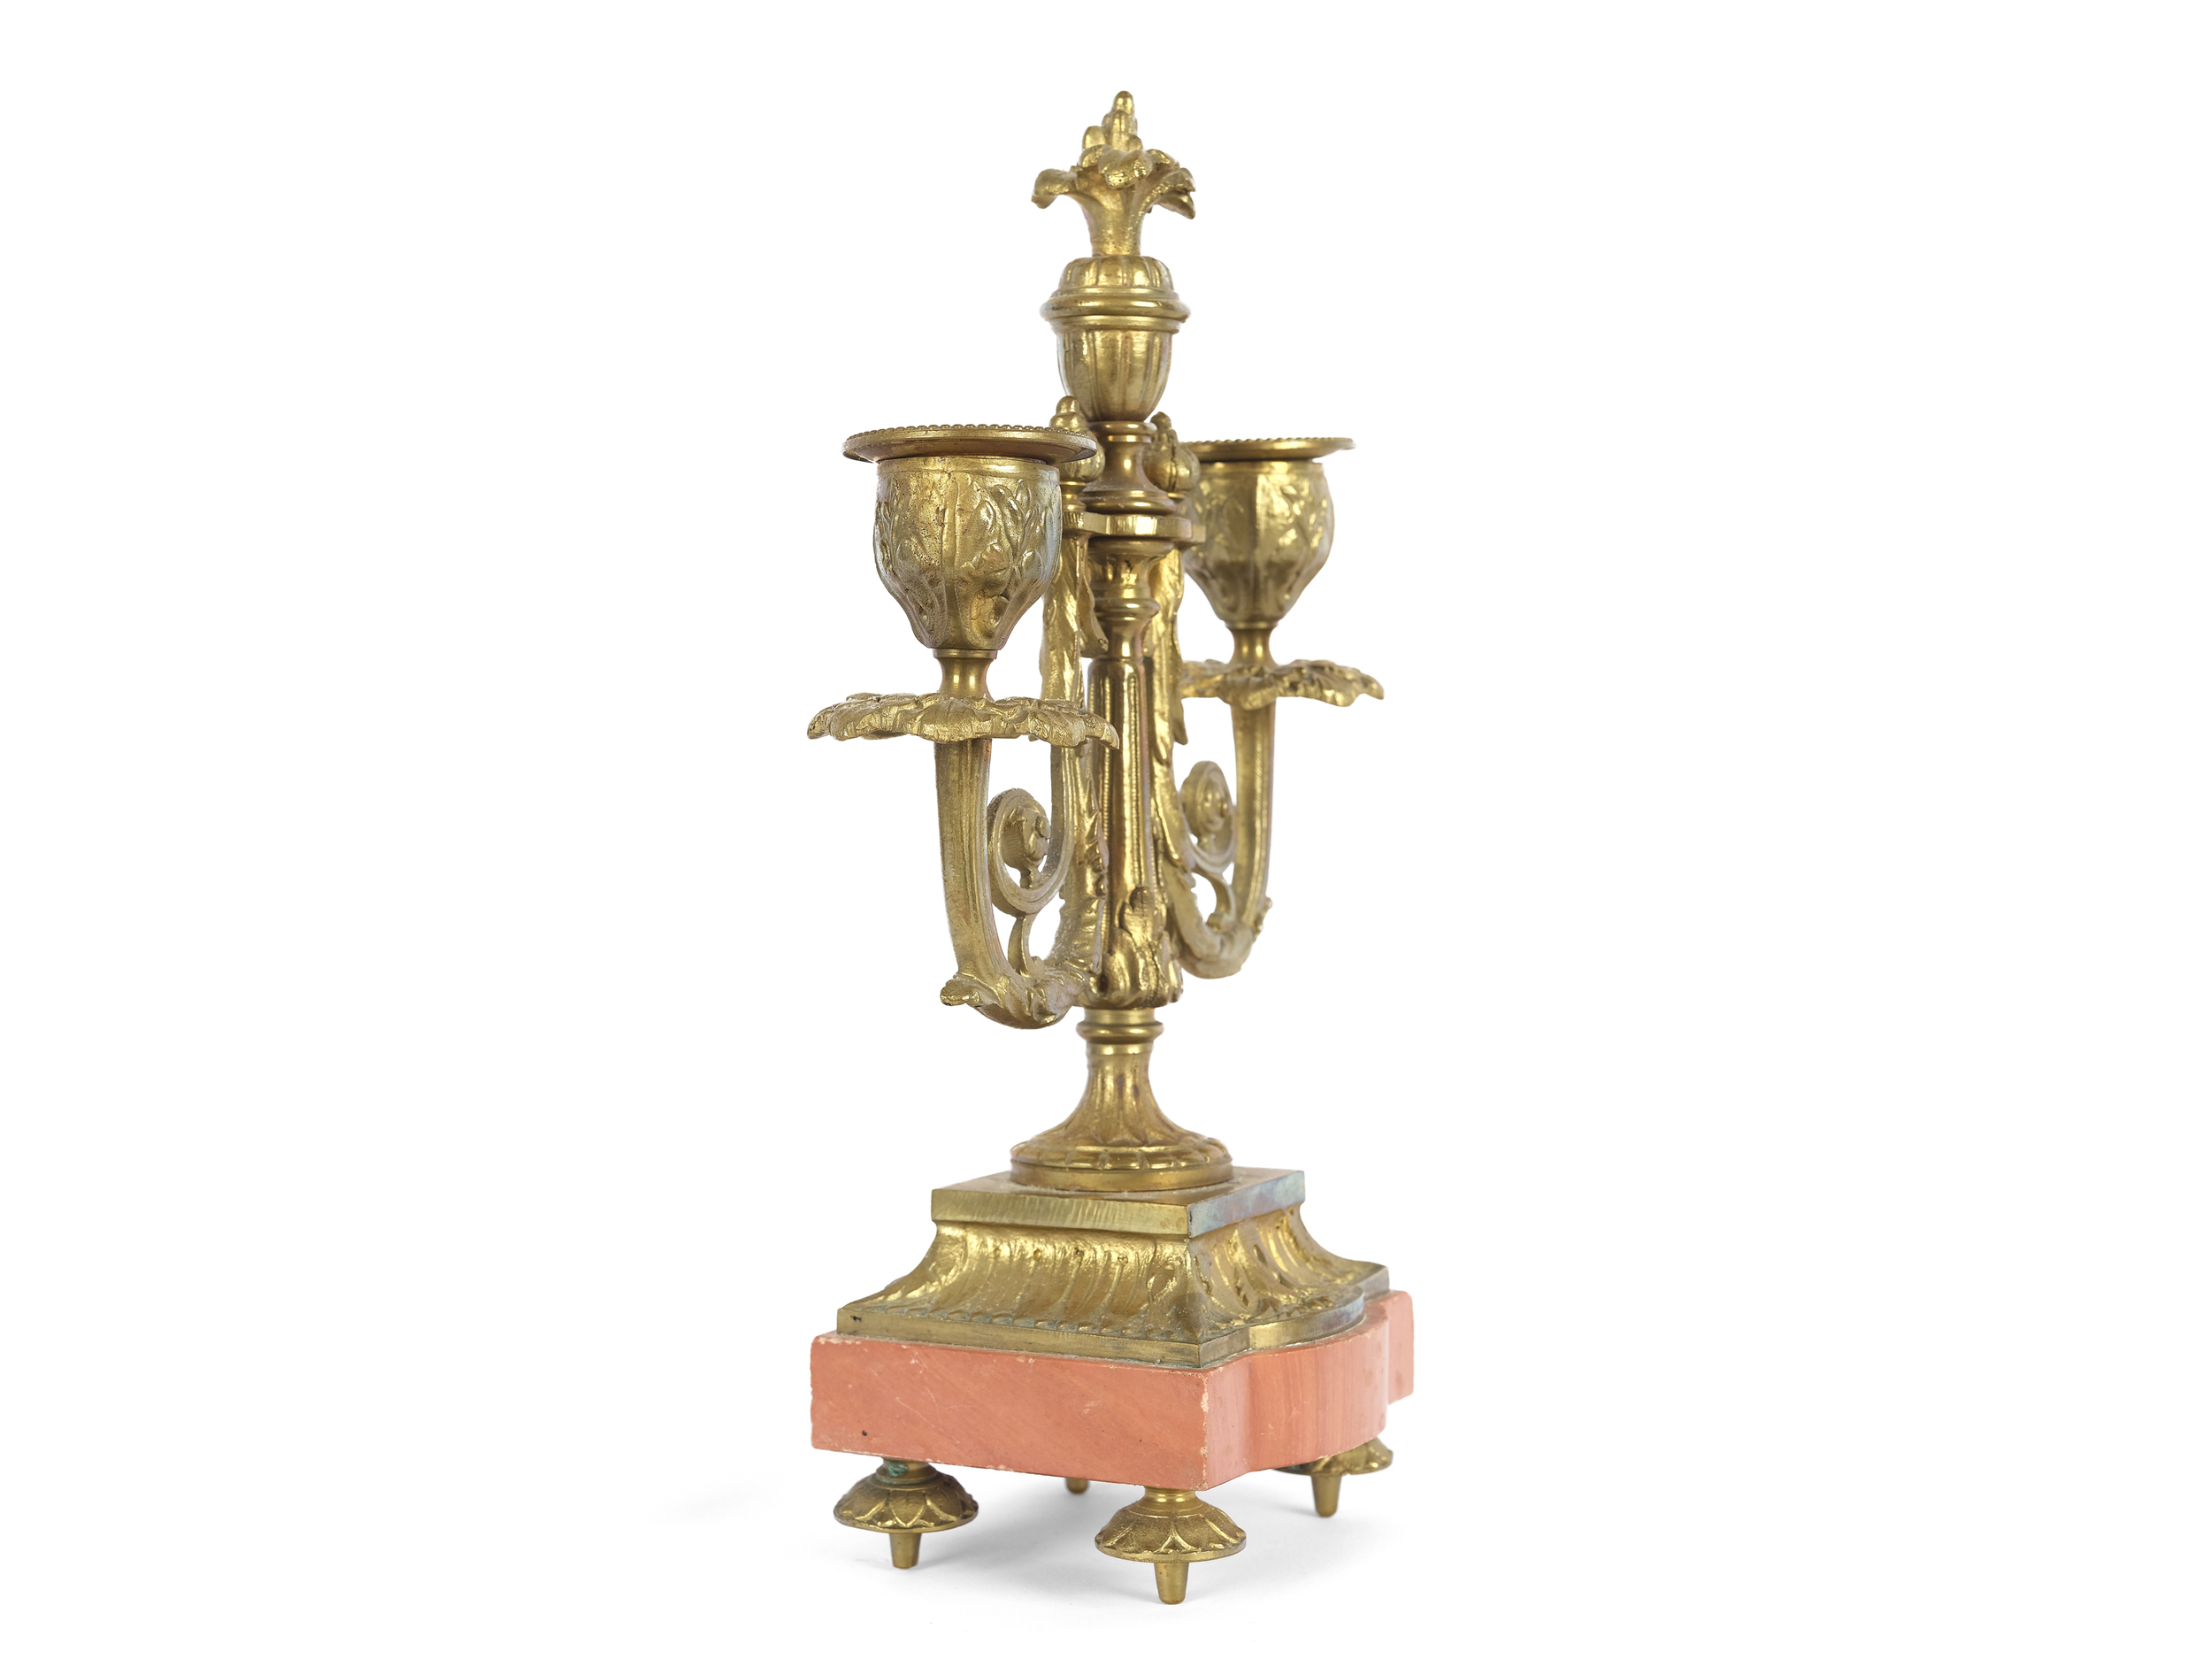 Small chandelier, two-armed, Louis XVI, around 1900  - Image 3 of 3